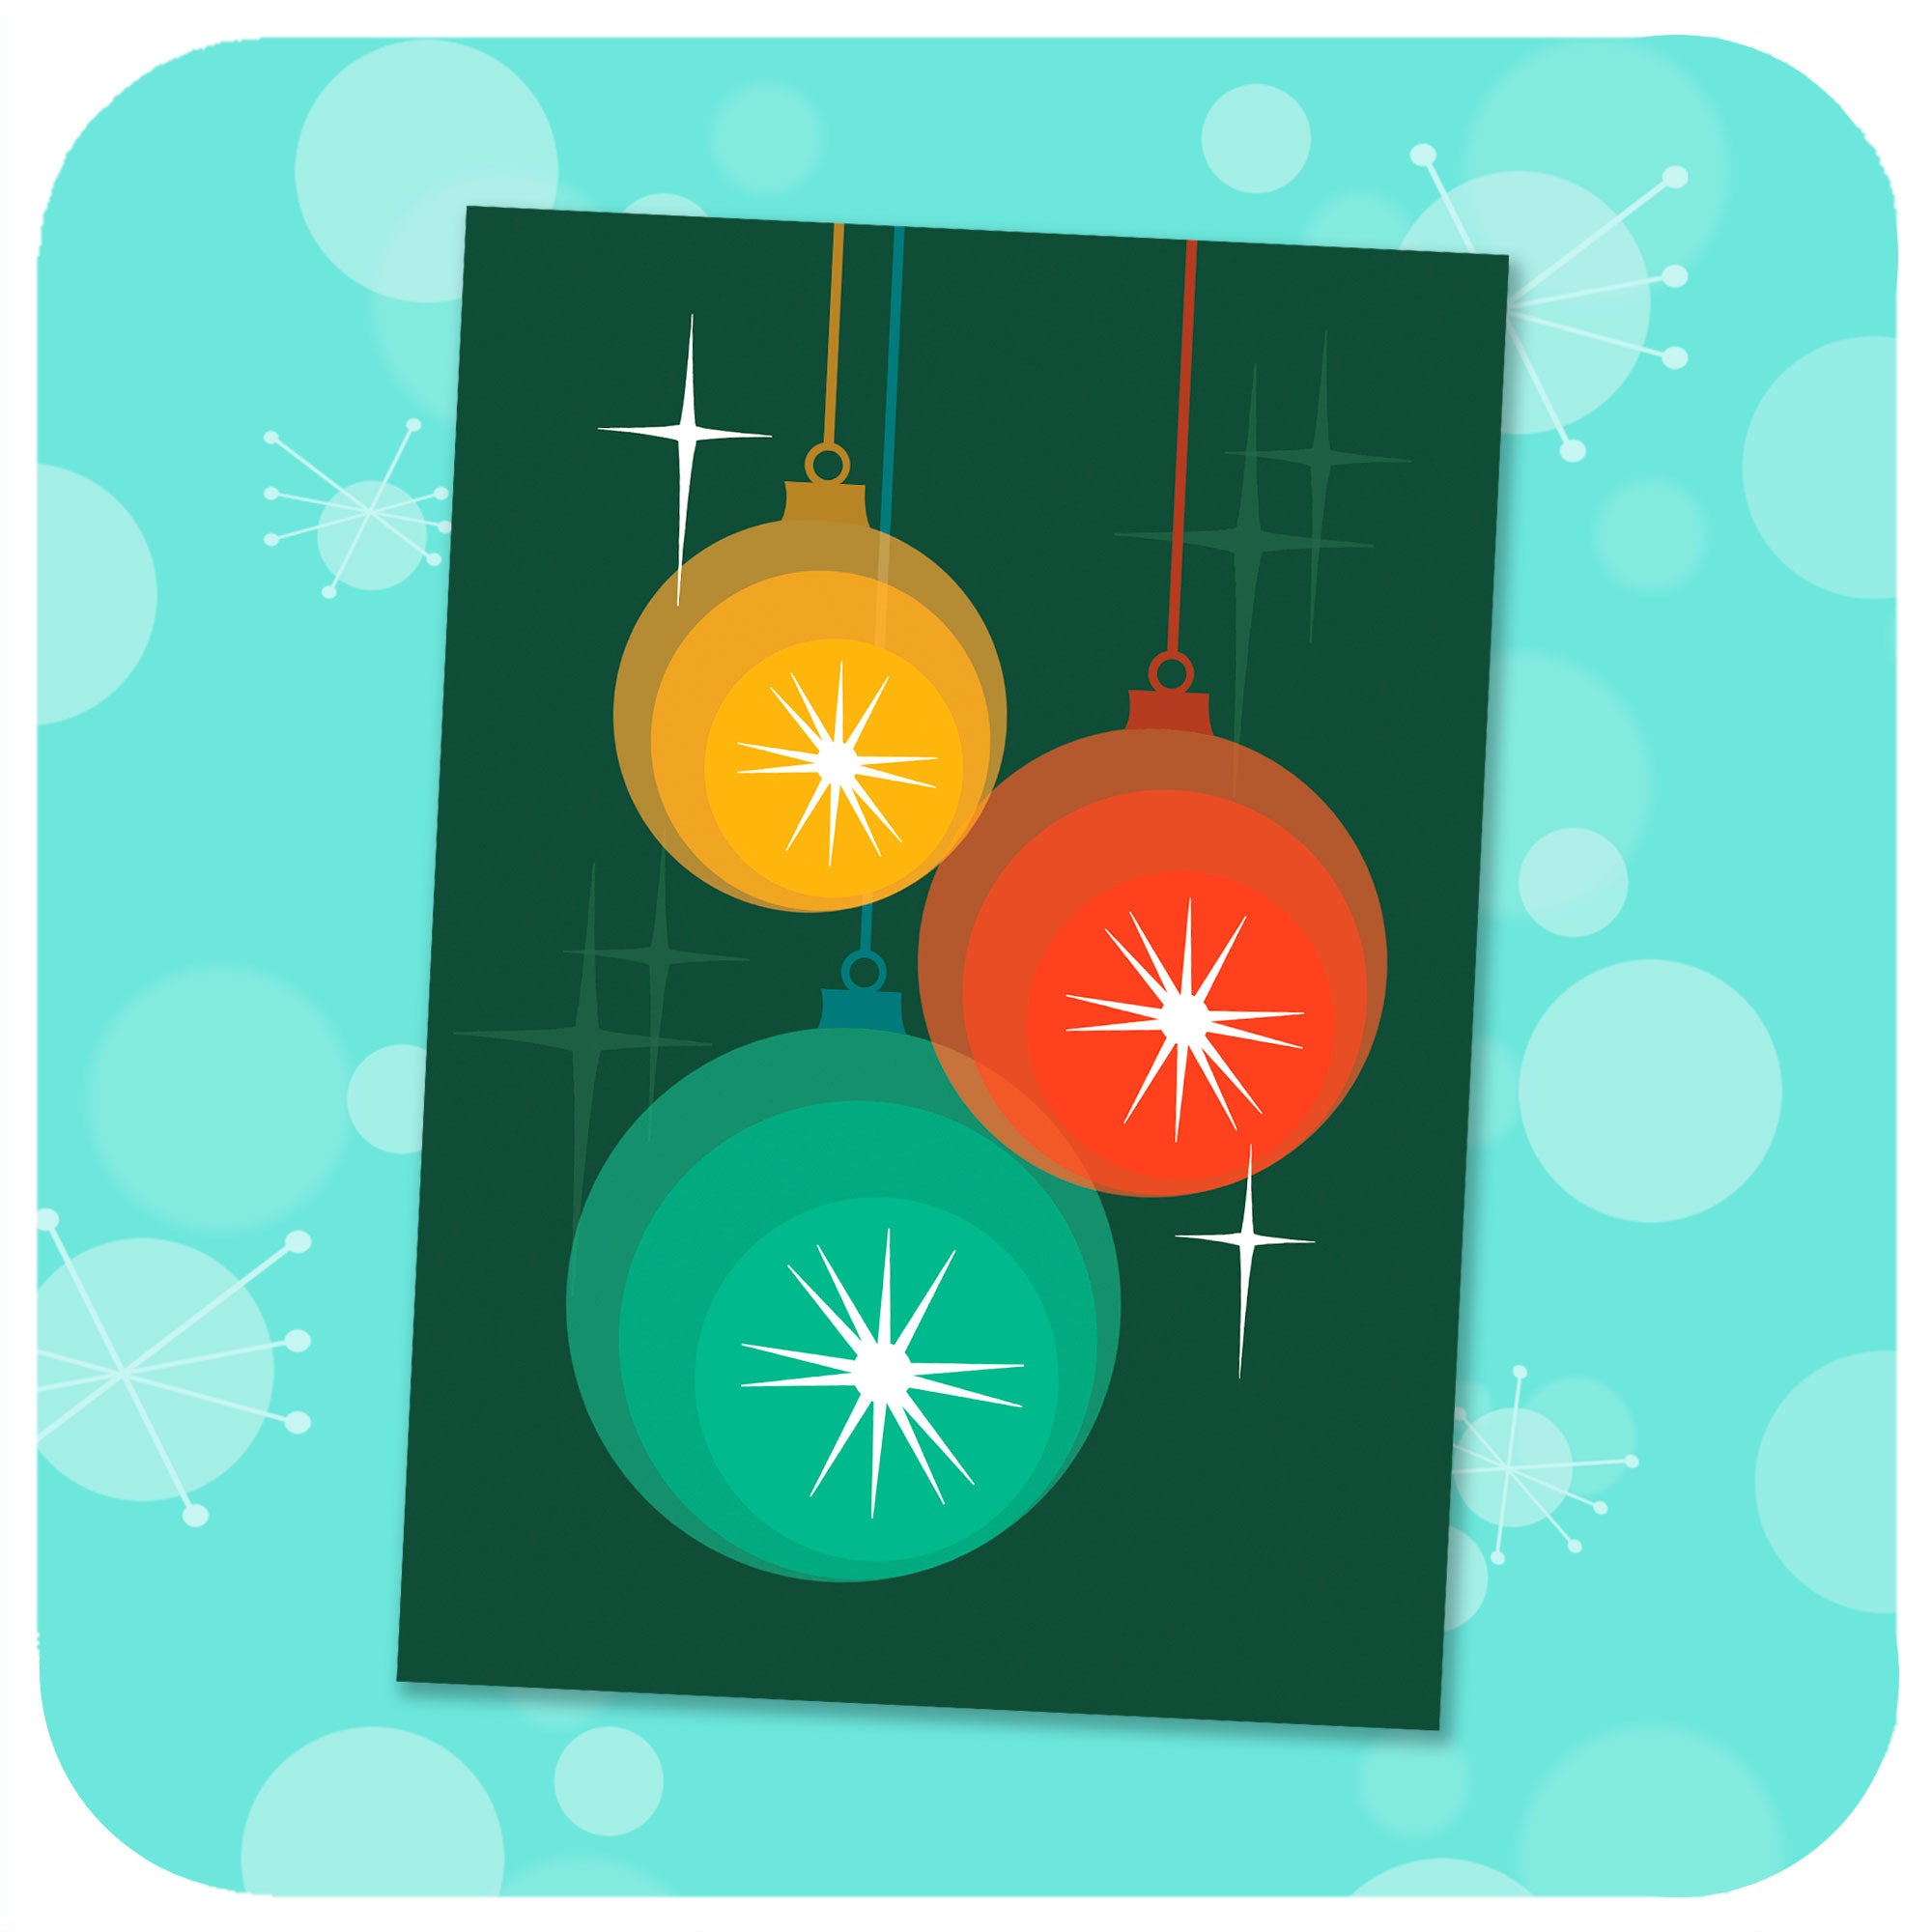 Retro Christmas Baubles Christmas Card lying on a patterned blue background featuring atomic style starbursts  | The Inkabilly Emporium